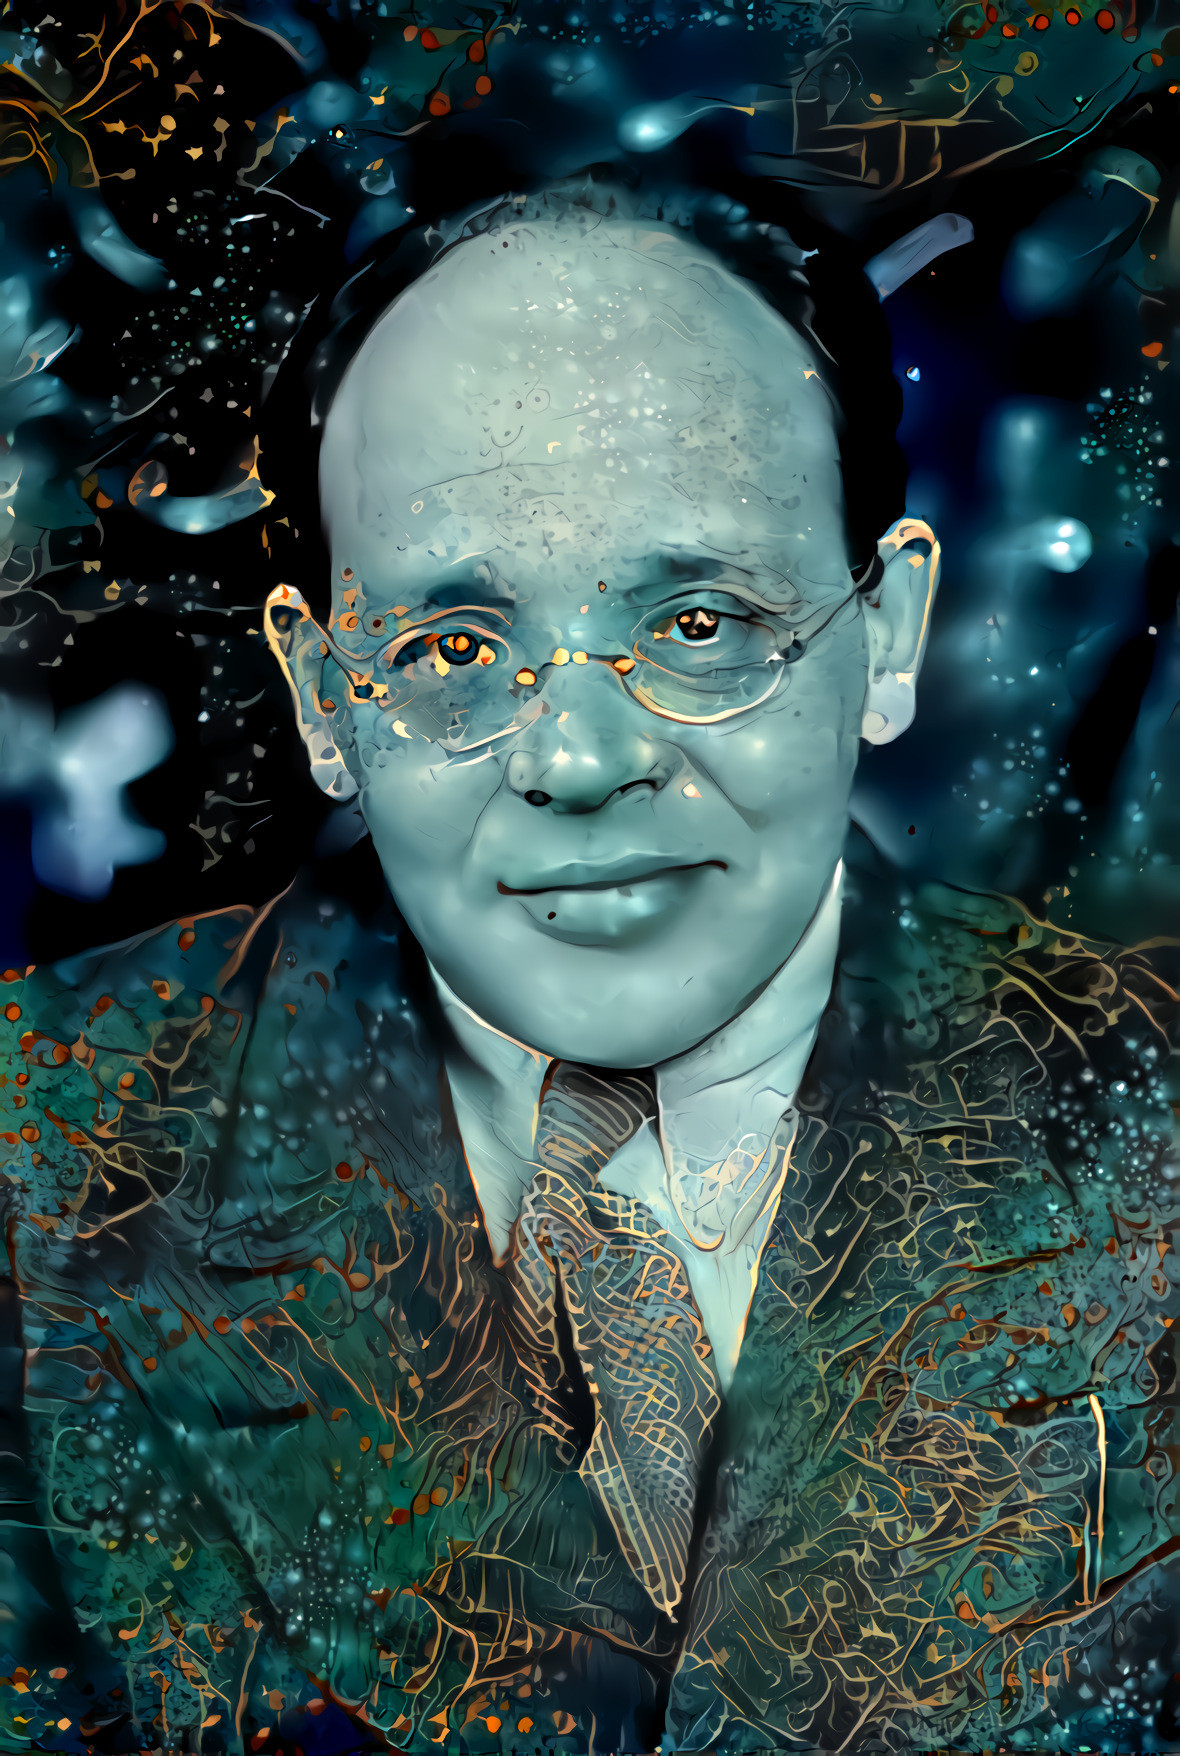 Deep Dreamin’ the great Russian author Isaac Babel